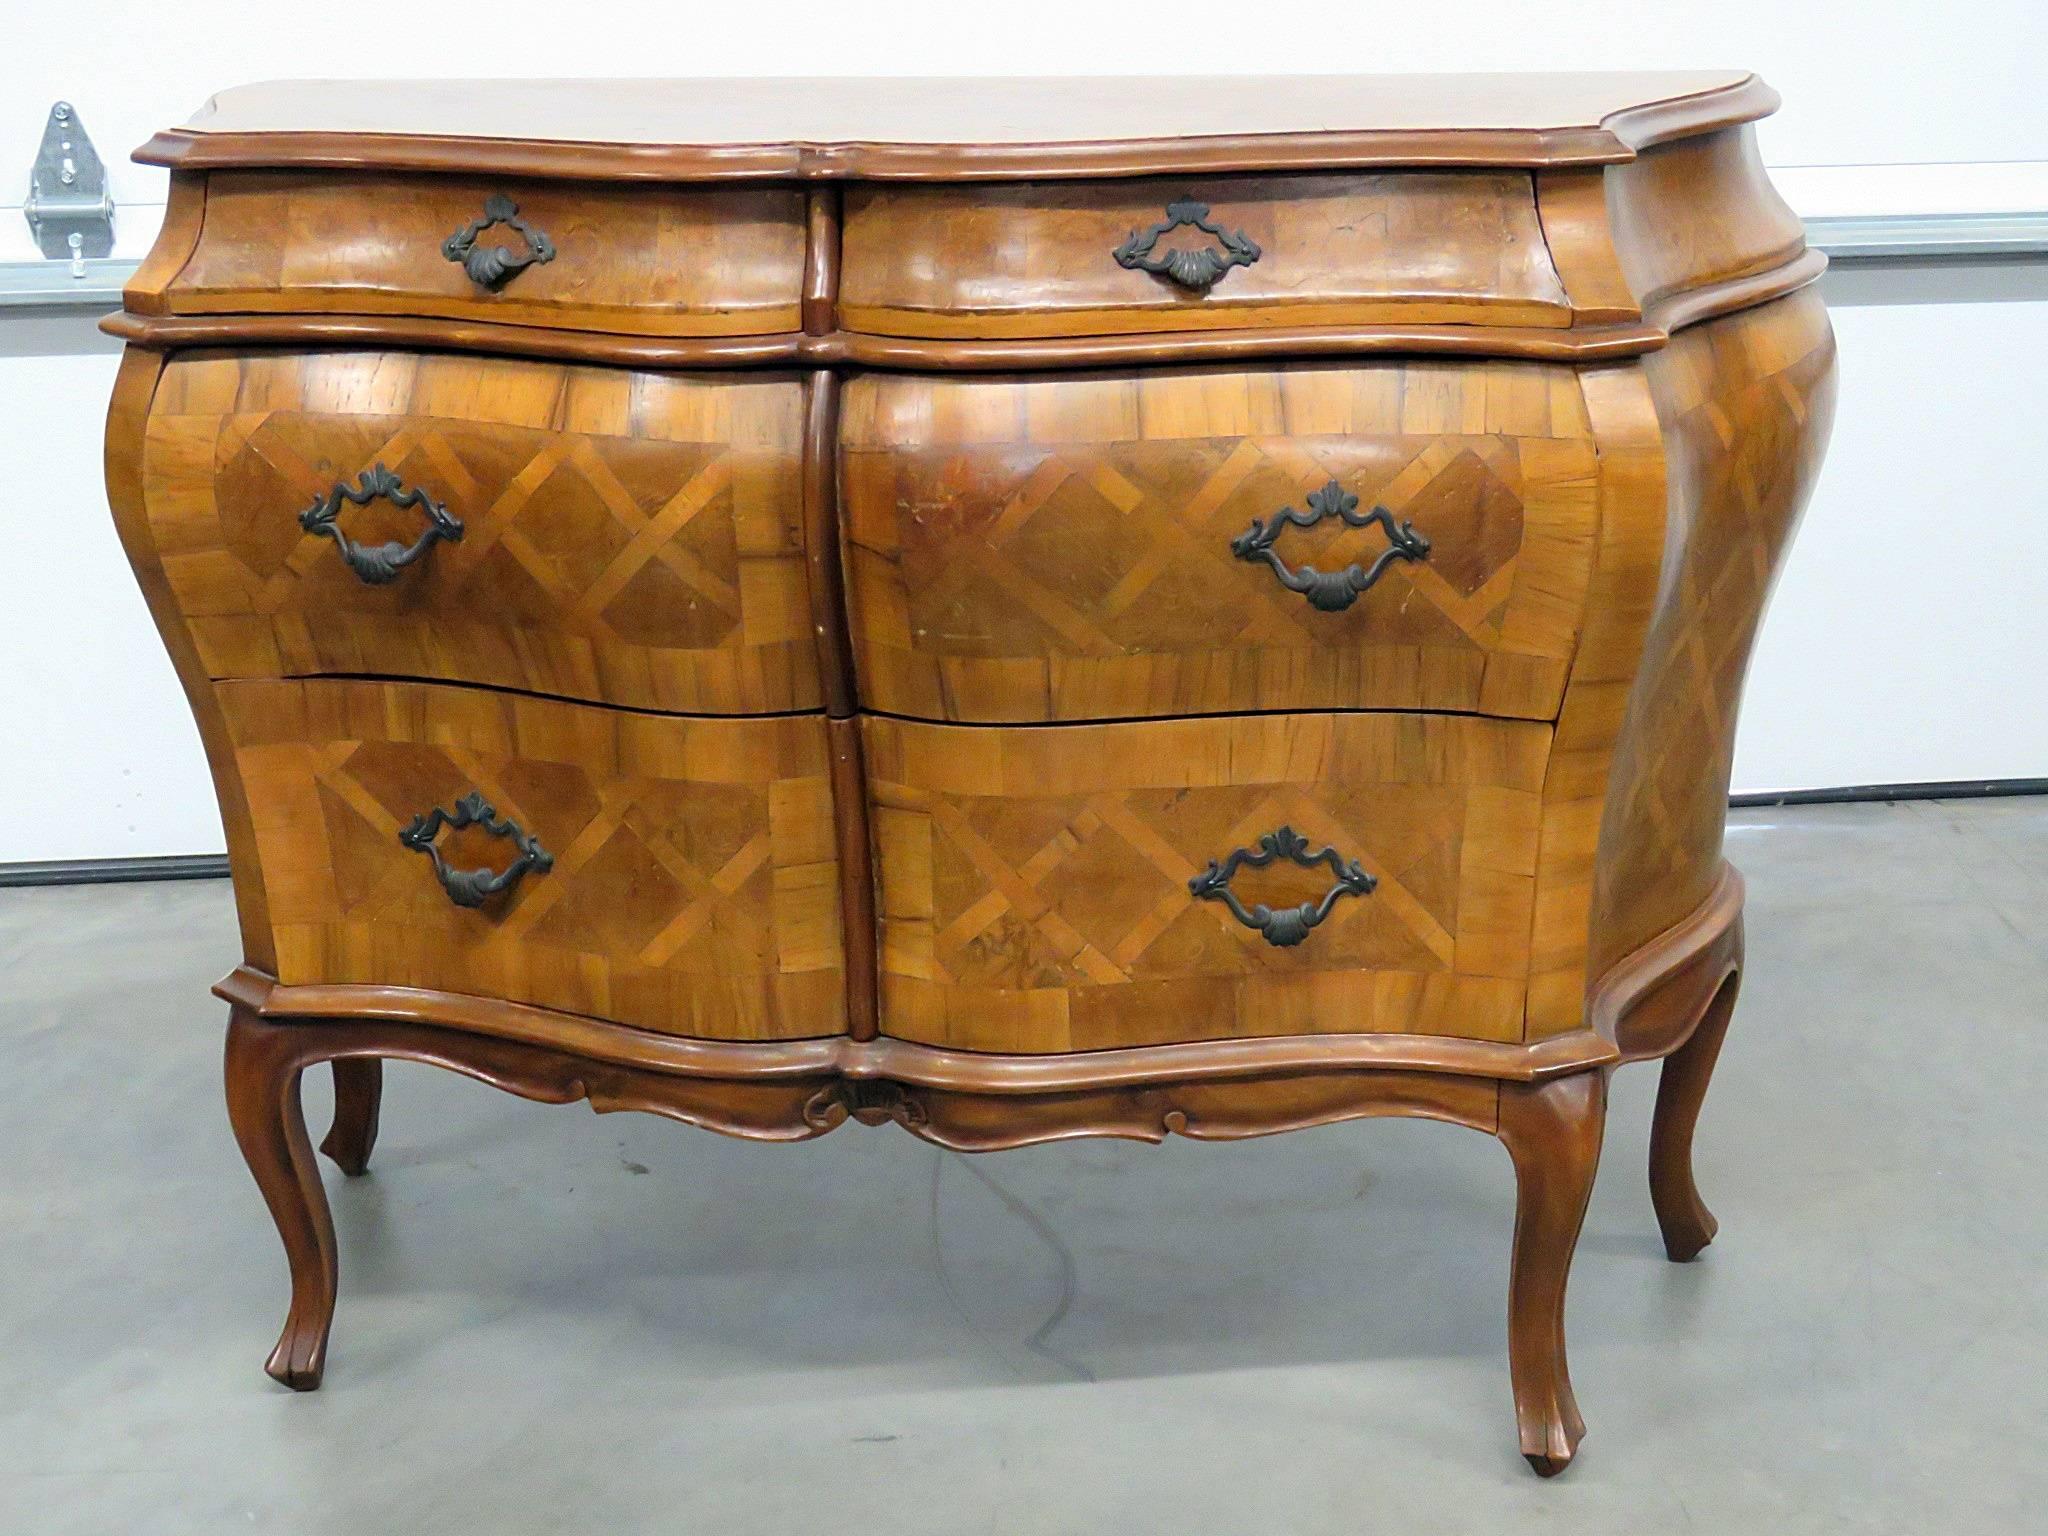 Louis XV style inlaid parquetry commode with four drawers.